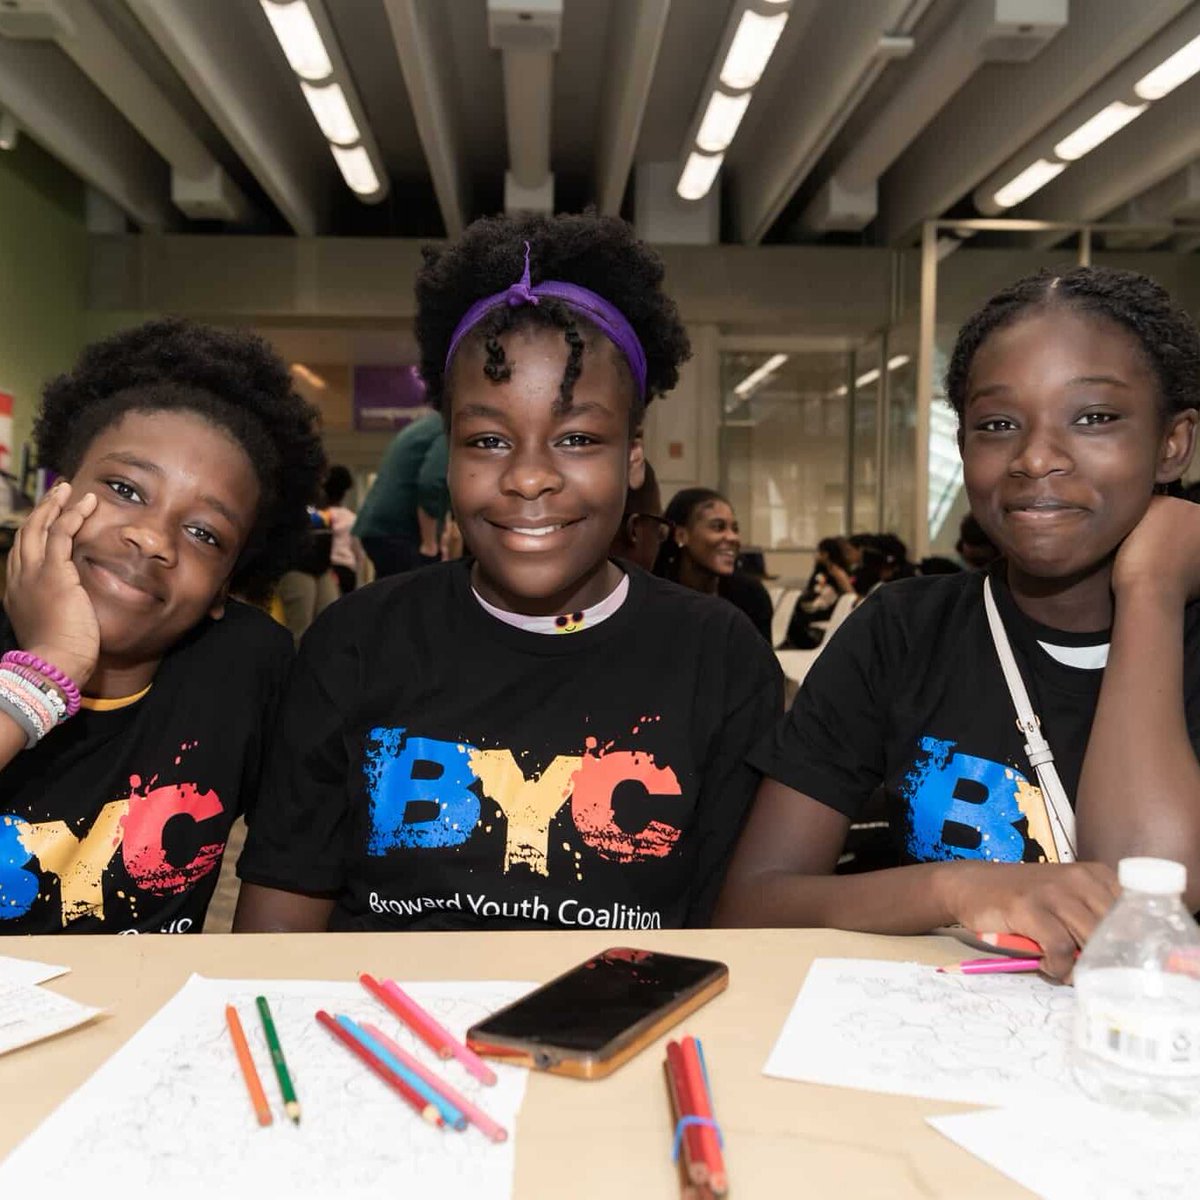 📣 Calling all change-makers! Join us for the next Broward Youth Coalition (BYC) Action Team Meeting on May 8th! To learn more about BYC, please visit: bit.ly/3w9VZlX or to take part in the meeting, please contact Jenna Stein at jstein@UnitedWayBroward.org.